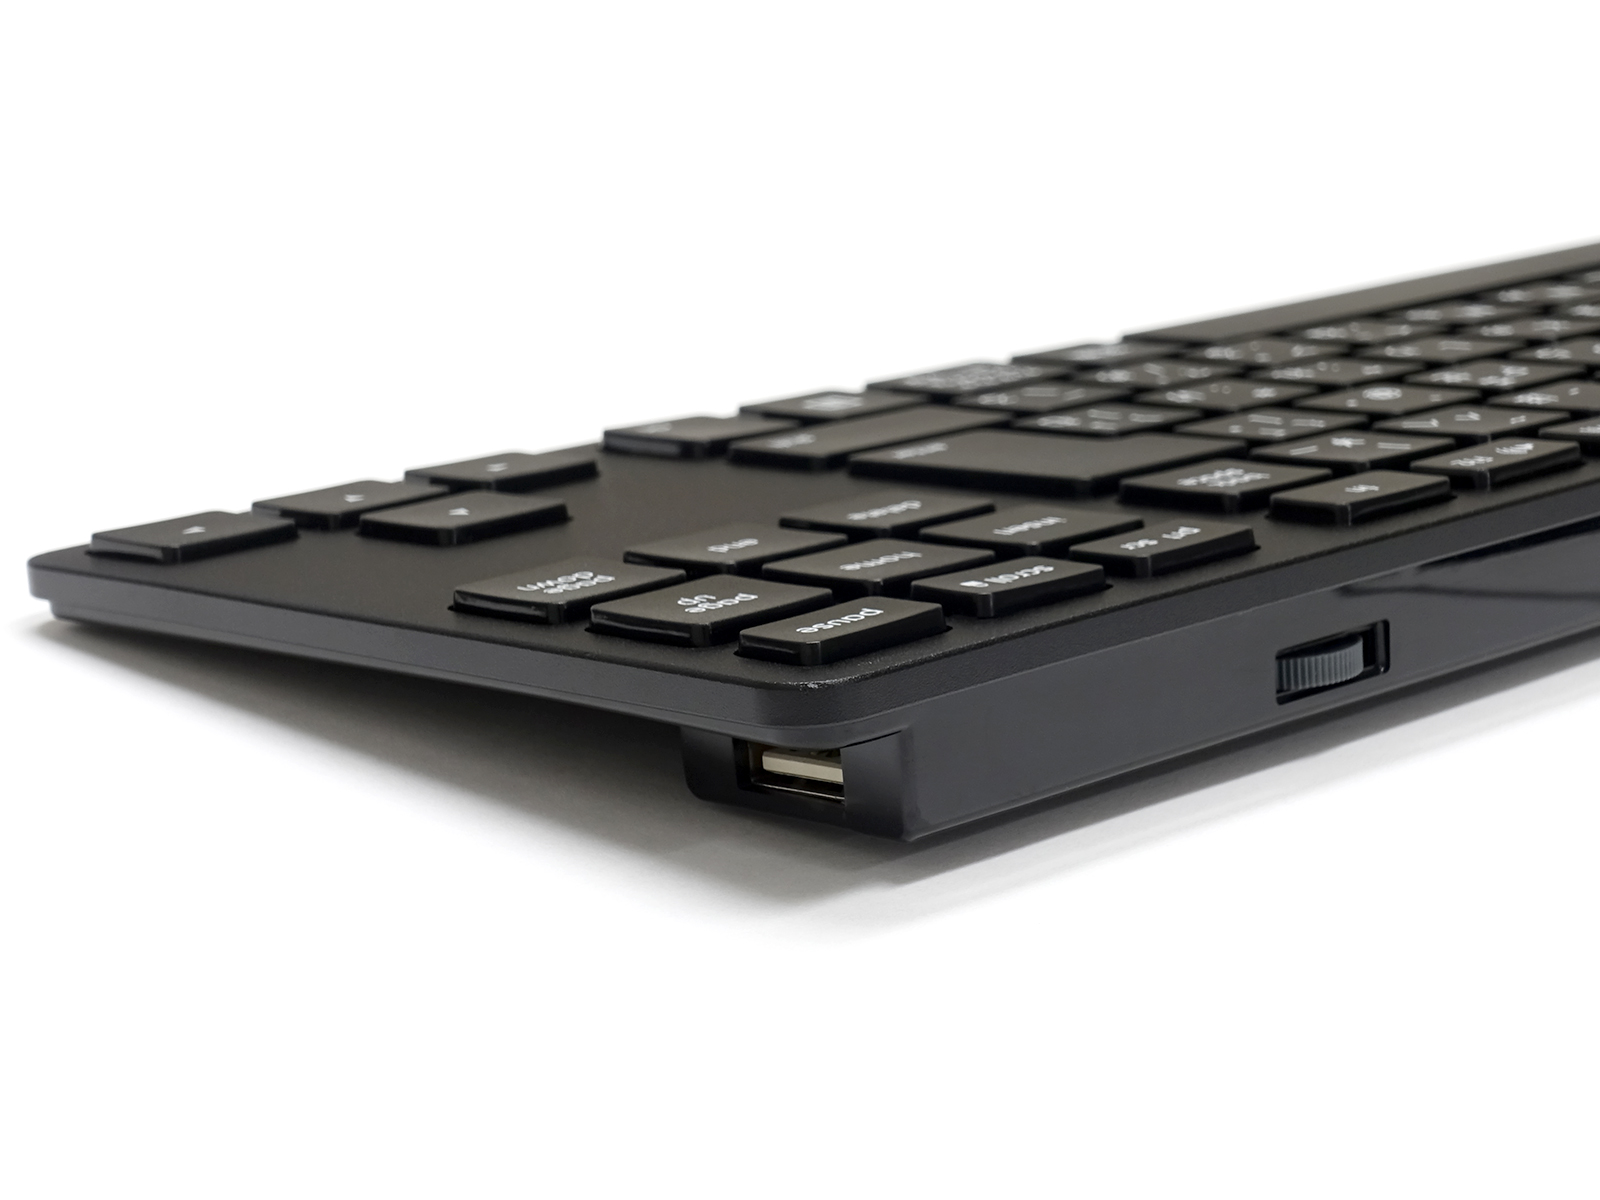 Matias Wired Aluminum Tenkeyless keyboard for PC: image 4 of 6thumb